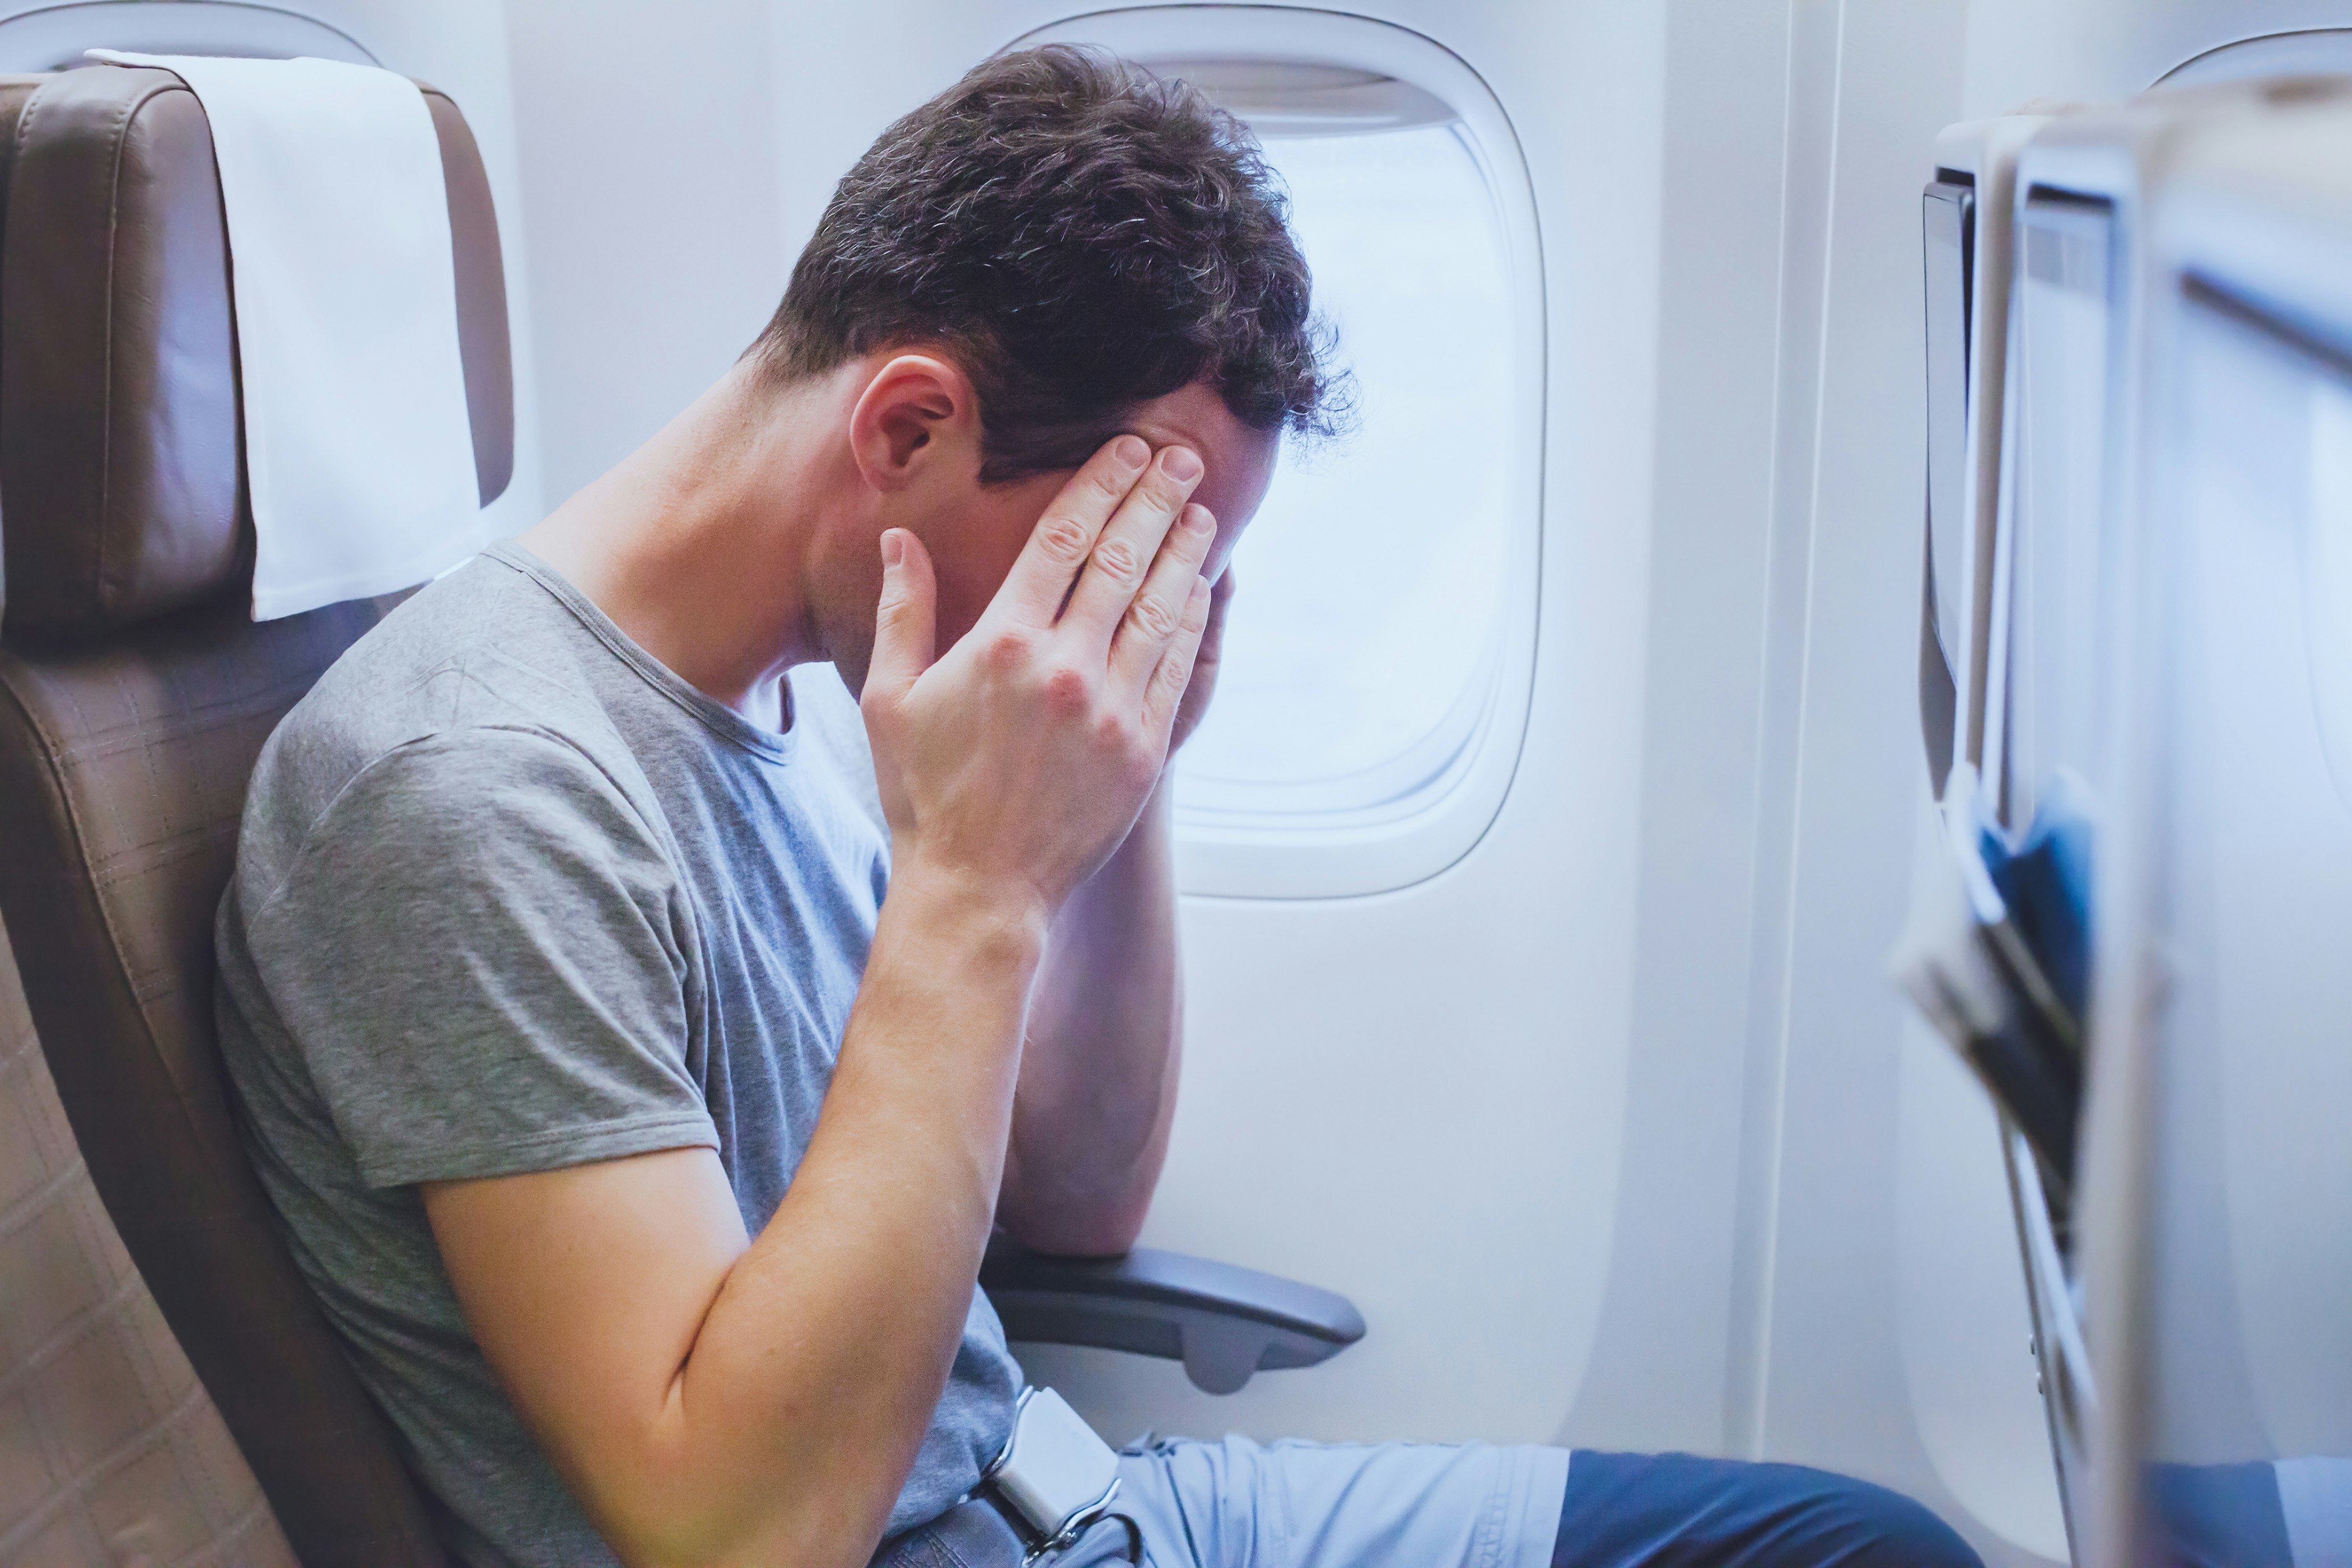 Man holding his head on the plane. Sunlight is coming through the window.